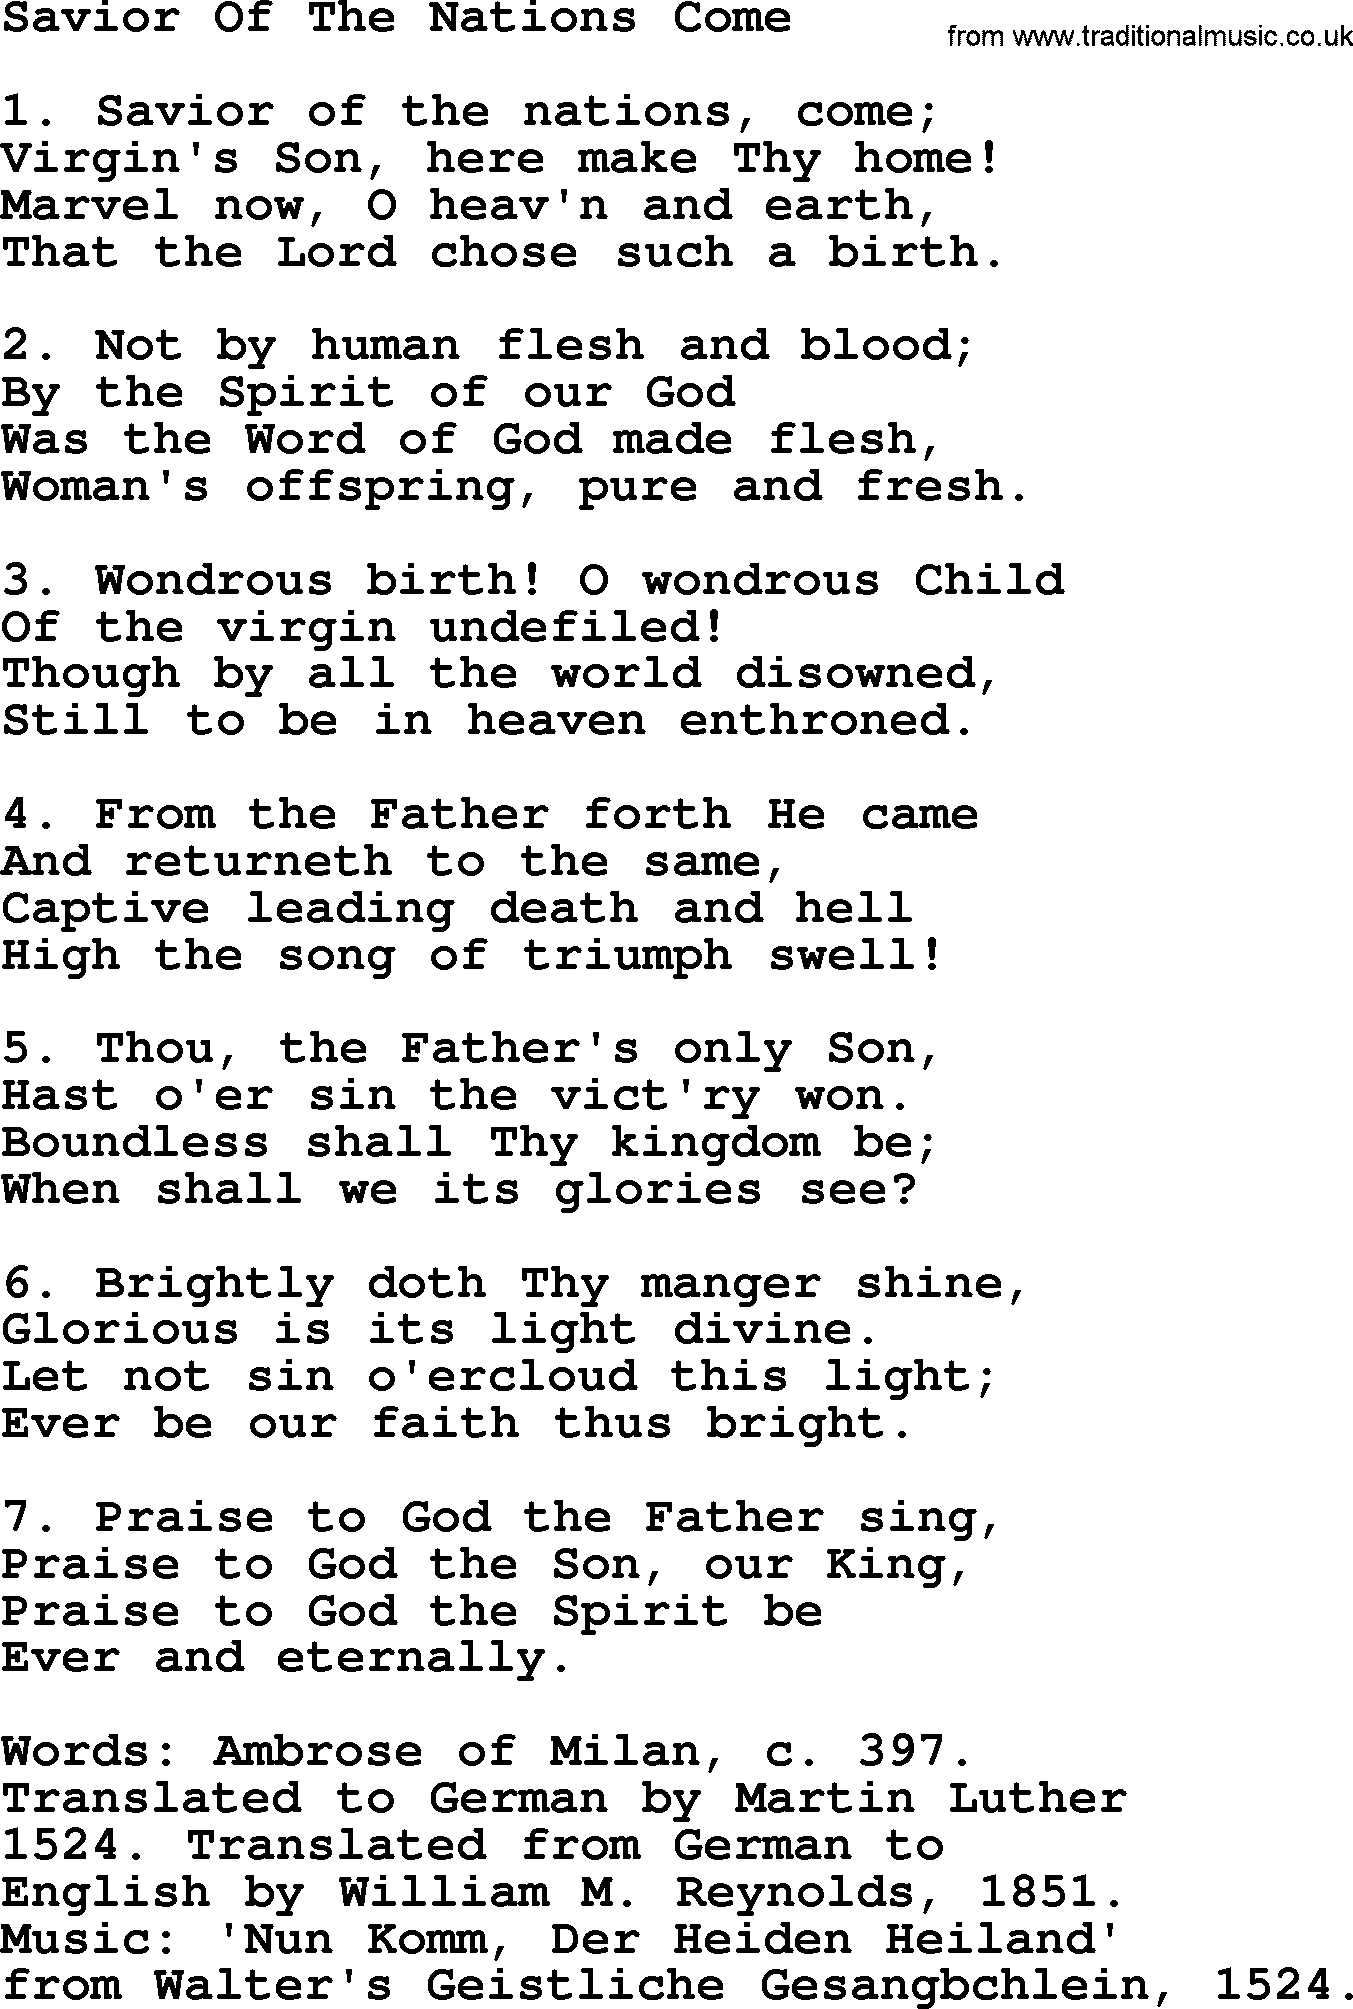 280 Christmas Hymns and songs with PowerPoints and PDF, title: Savior Of The Nations Come, lyrics, PPT and PDF